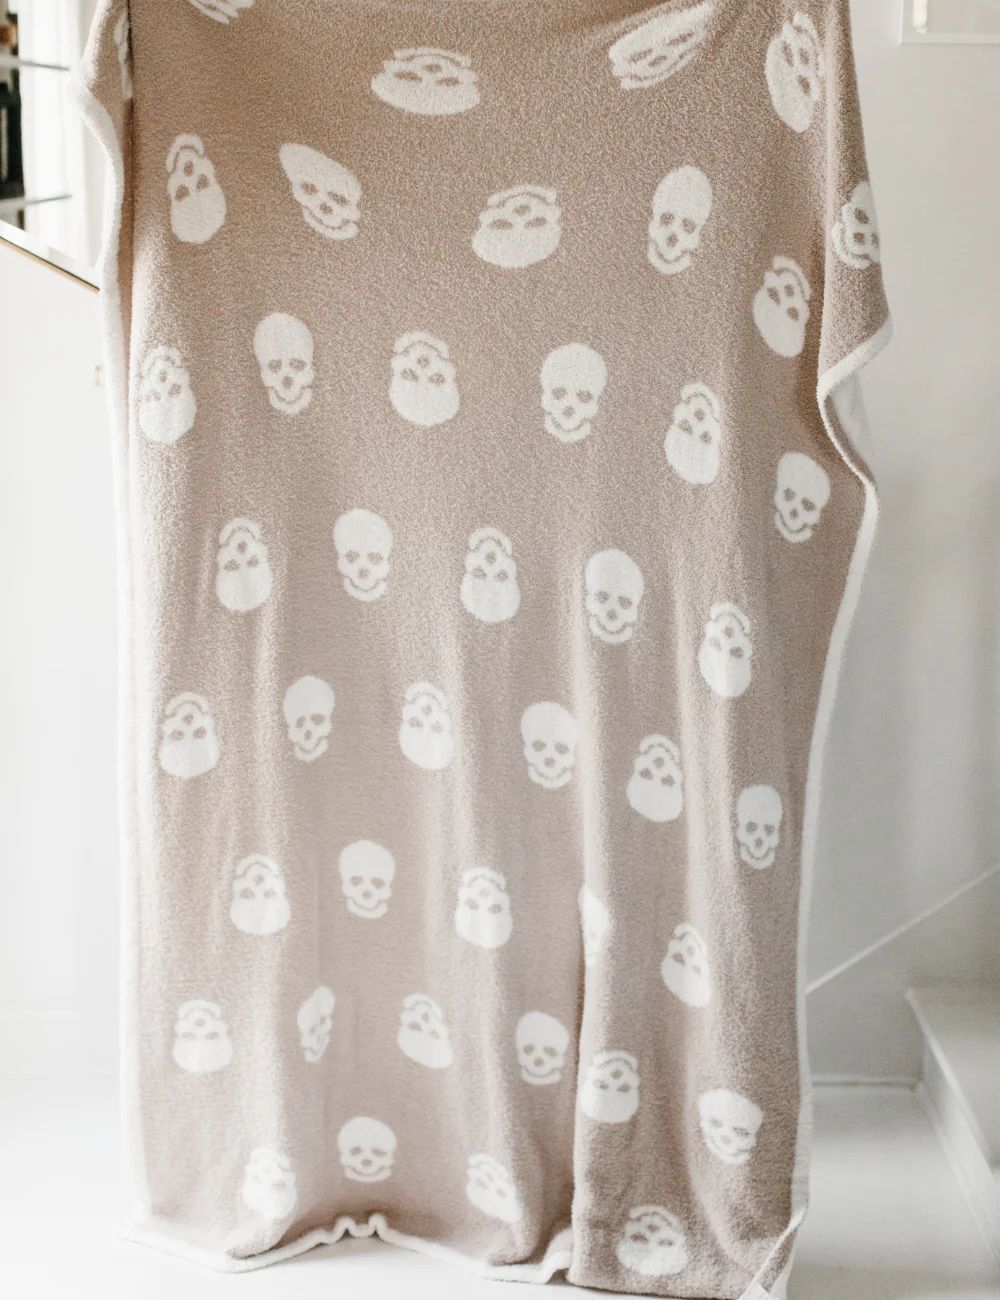 TSC X Tia Booth : Skulls Buttery Blanket | The Styled Collection